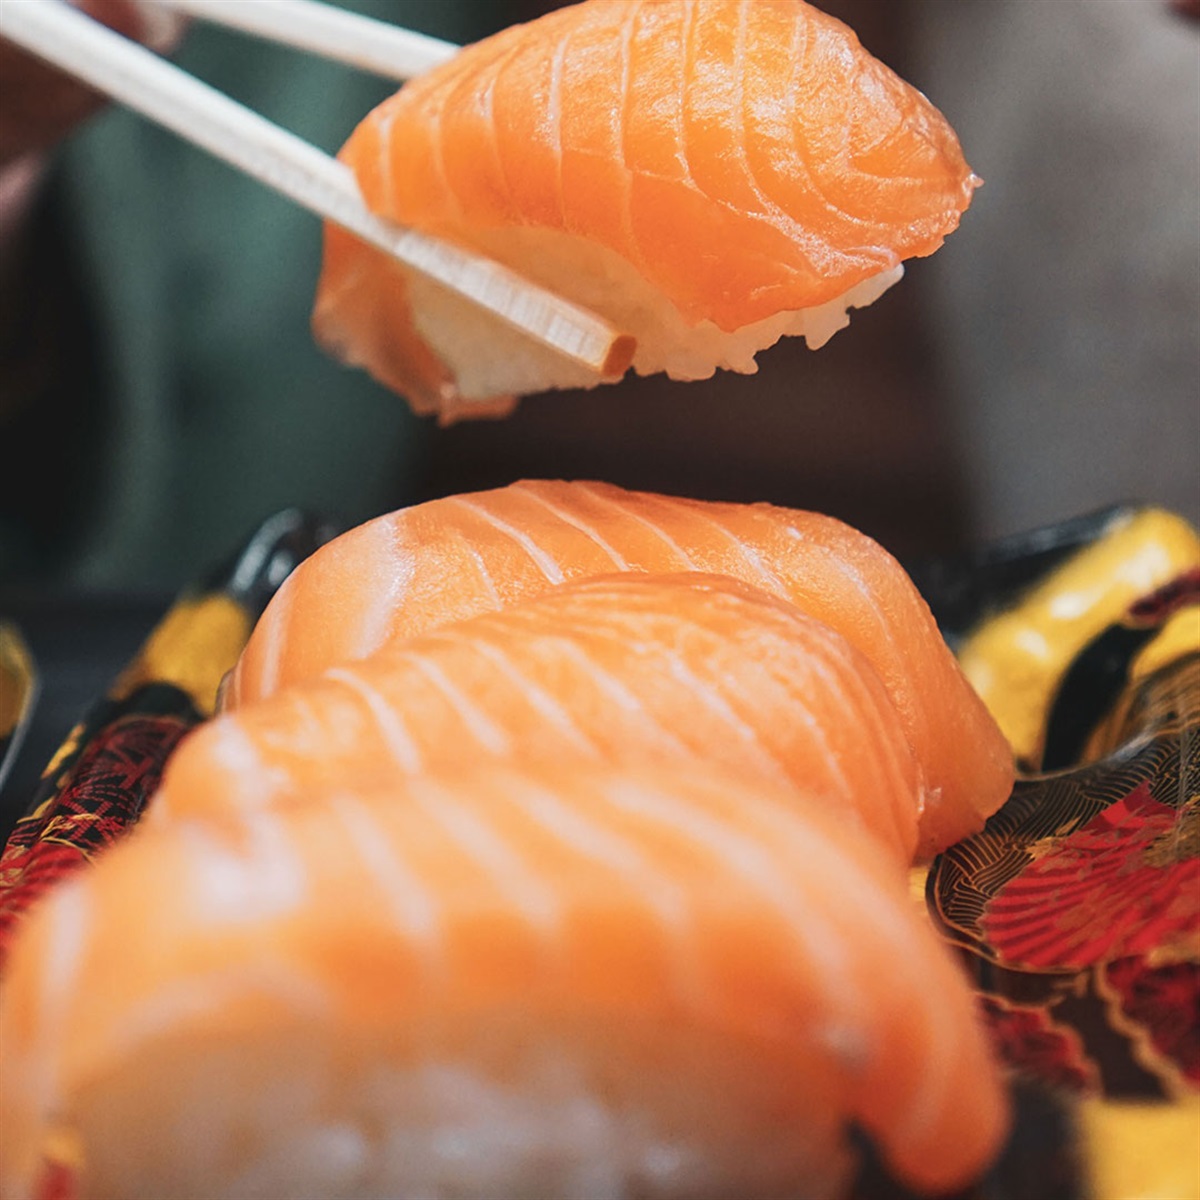 What the SUSHI is going on? - Santiment Community Insights